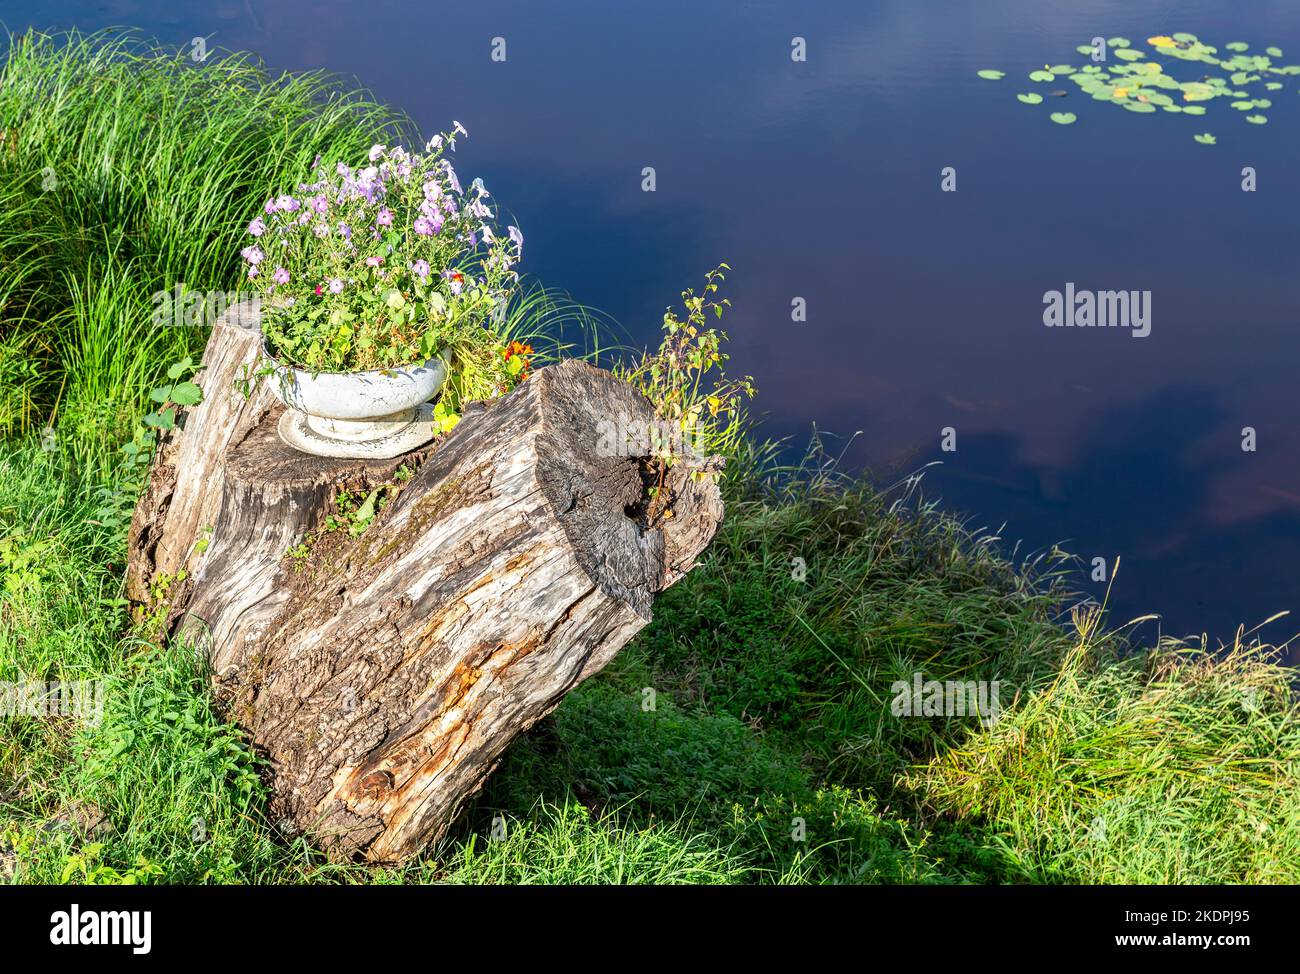 Decorative flowers in the metal vase on the old stump in summer sunny day Stock Photo